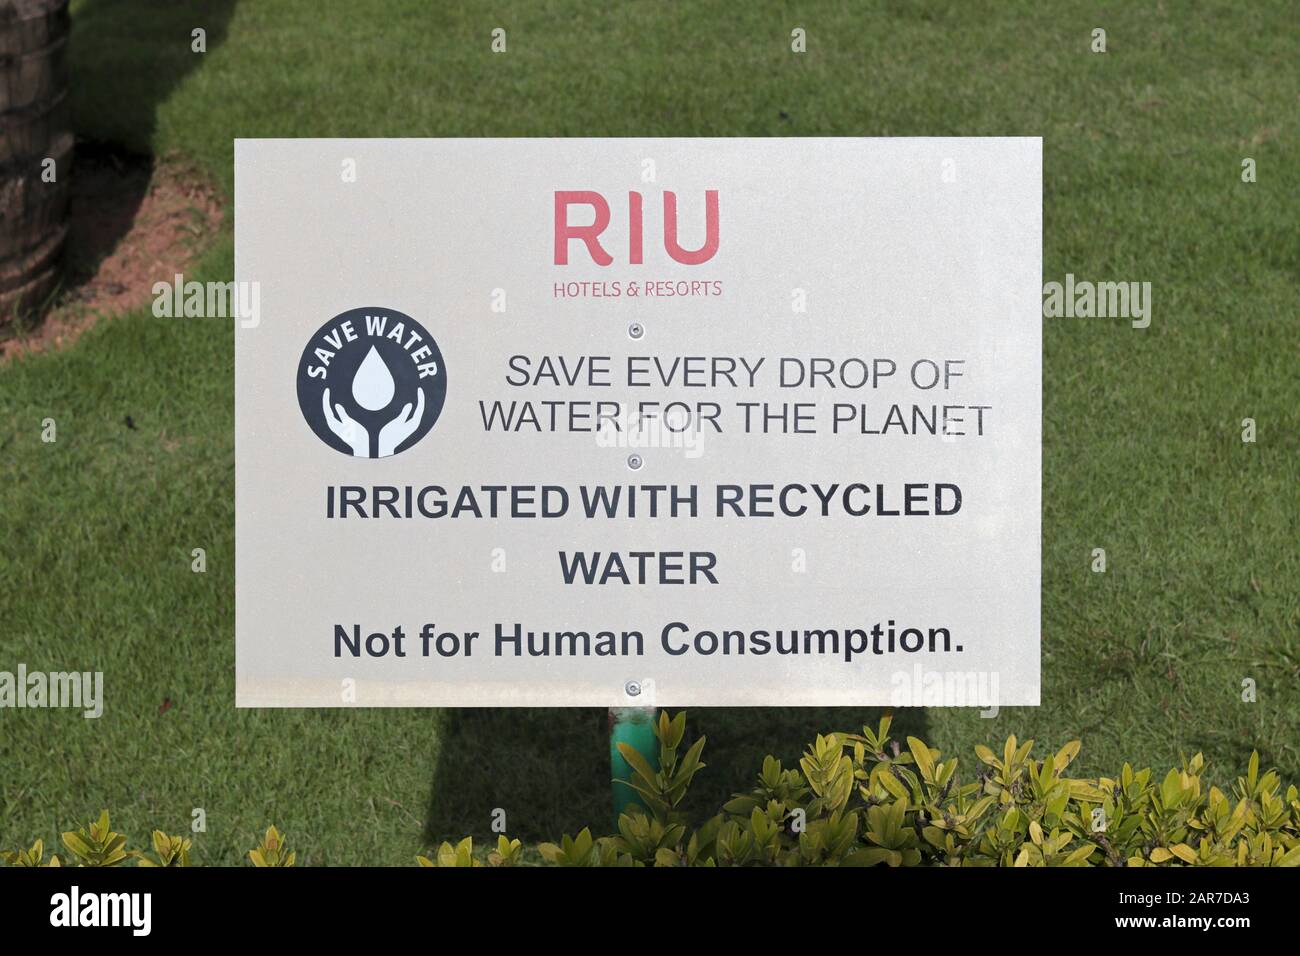 A sign in the grounds of a RIU Hotel saying - Save Water. Save Every Drop of Water for the Planet. Irrigated with recycled water. Not for human Consum Stock Photo